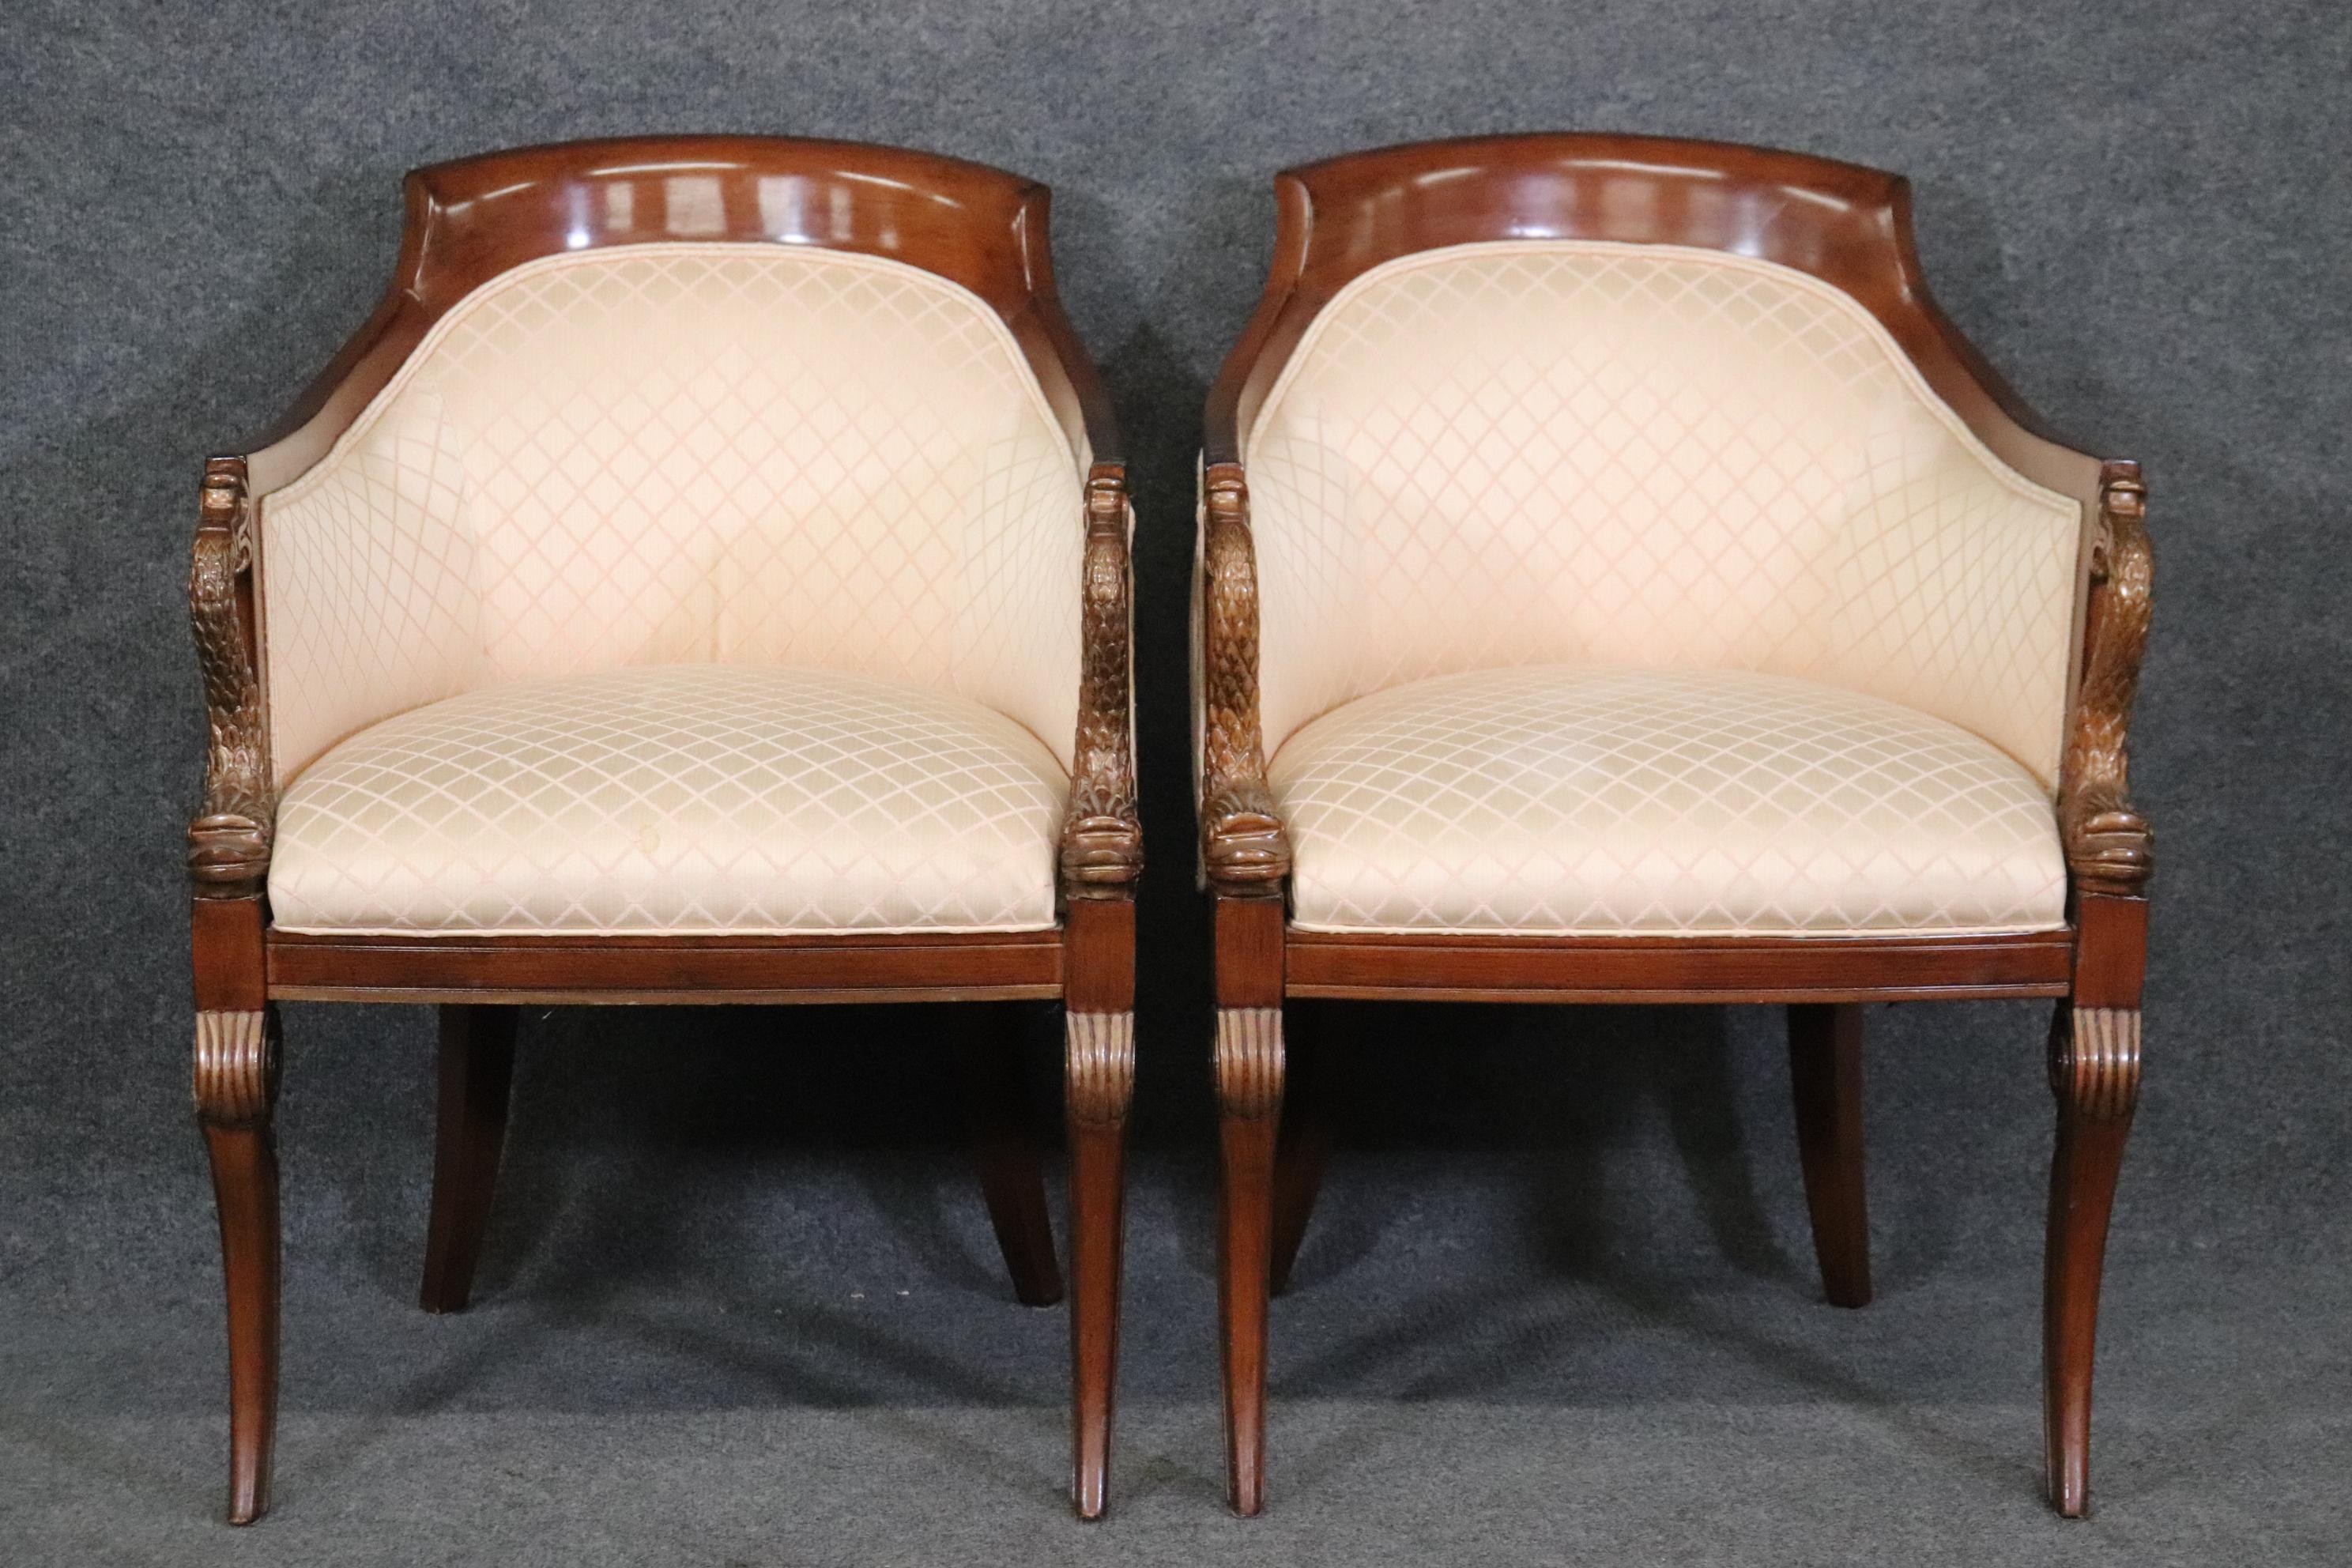 This is a gorgeous pair of club chairs in solid mahogany with carved 